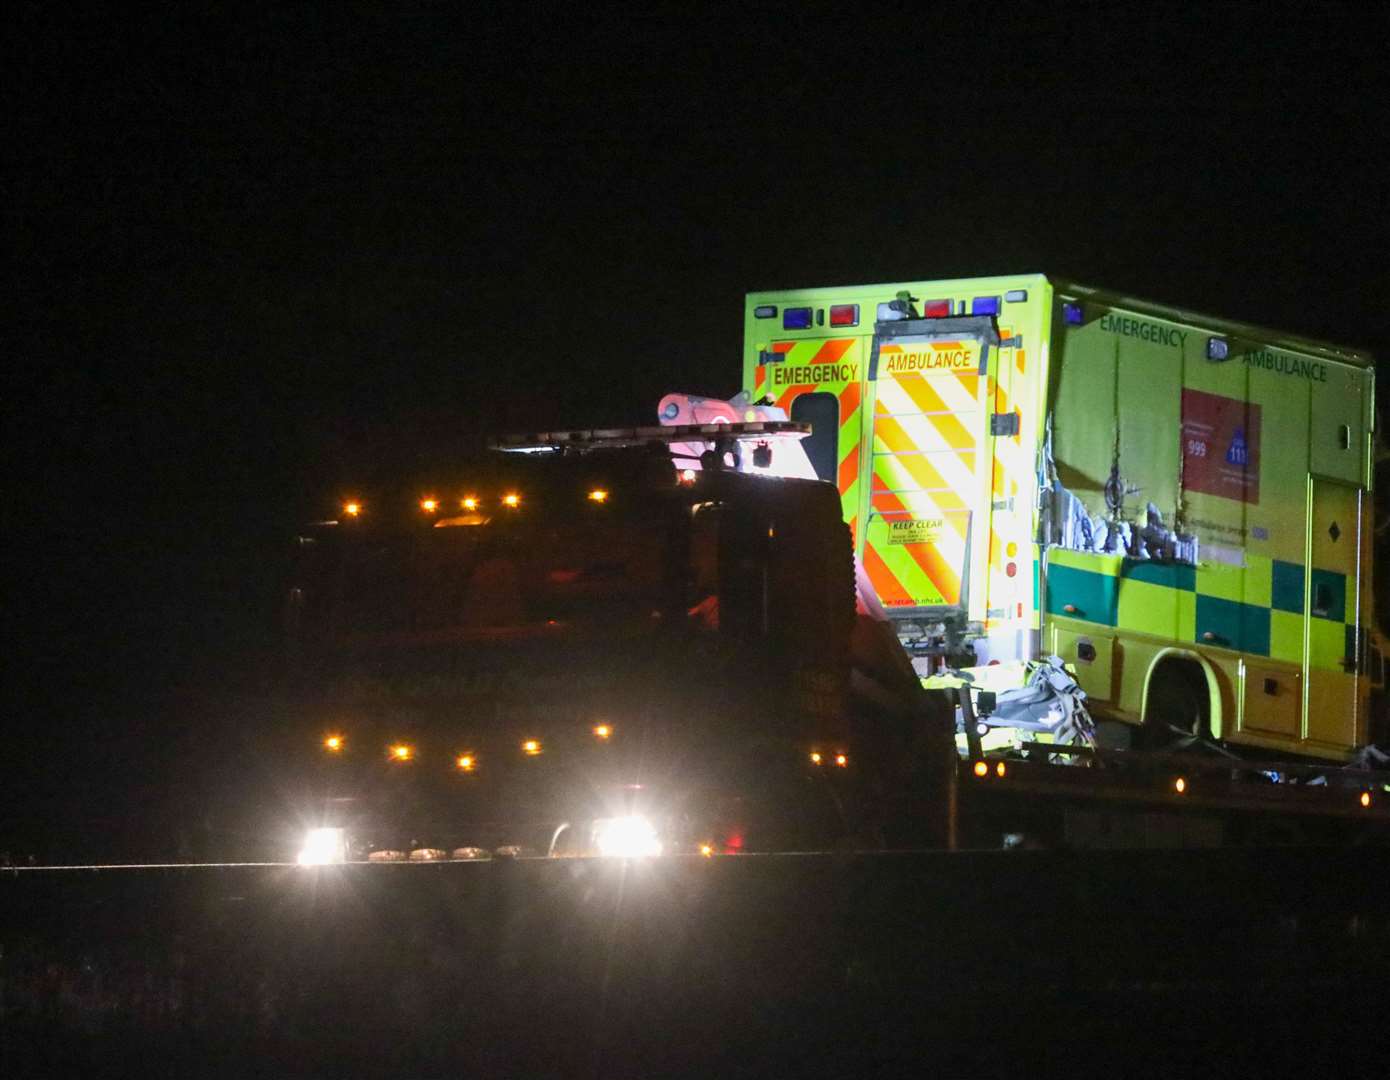 The ambulance involved in the crash. Picture: UKNIP